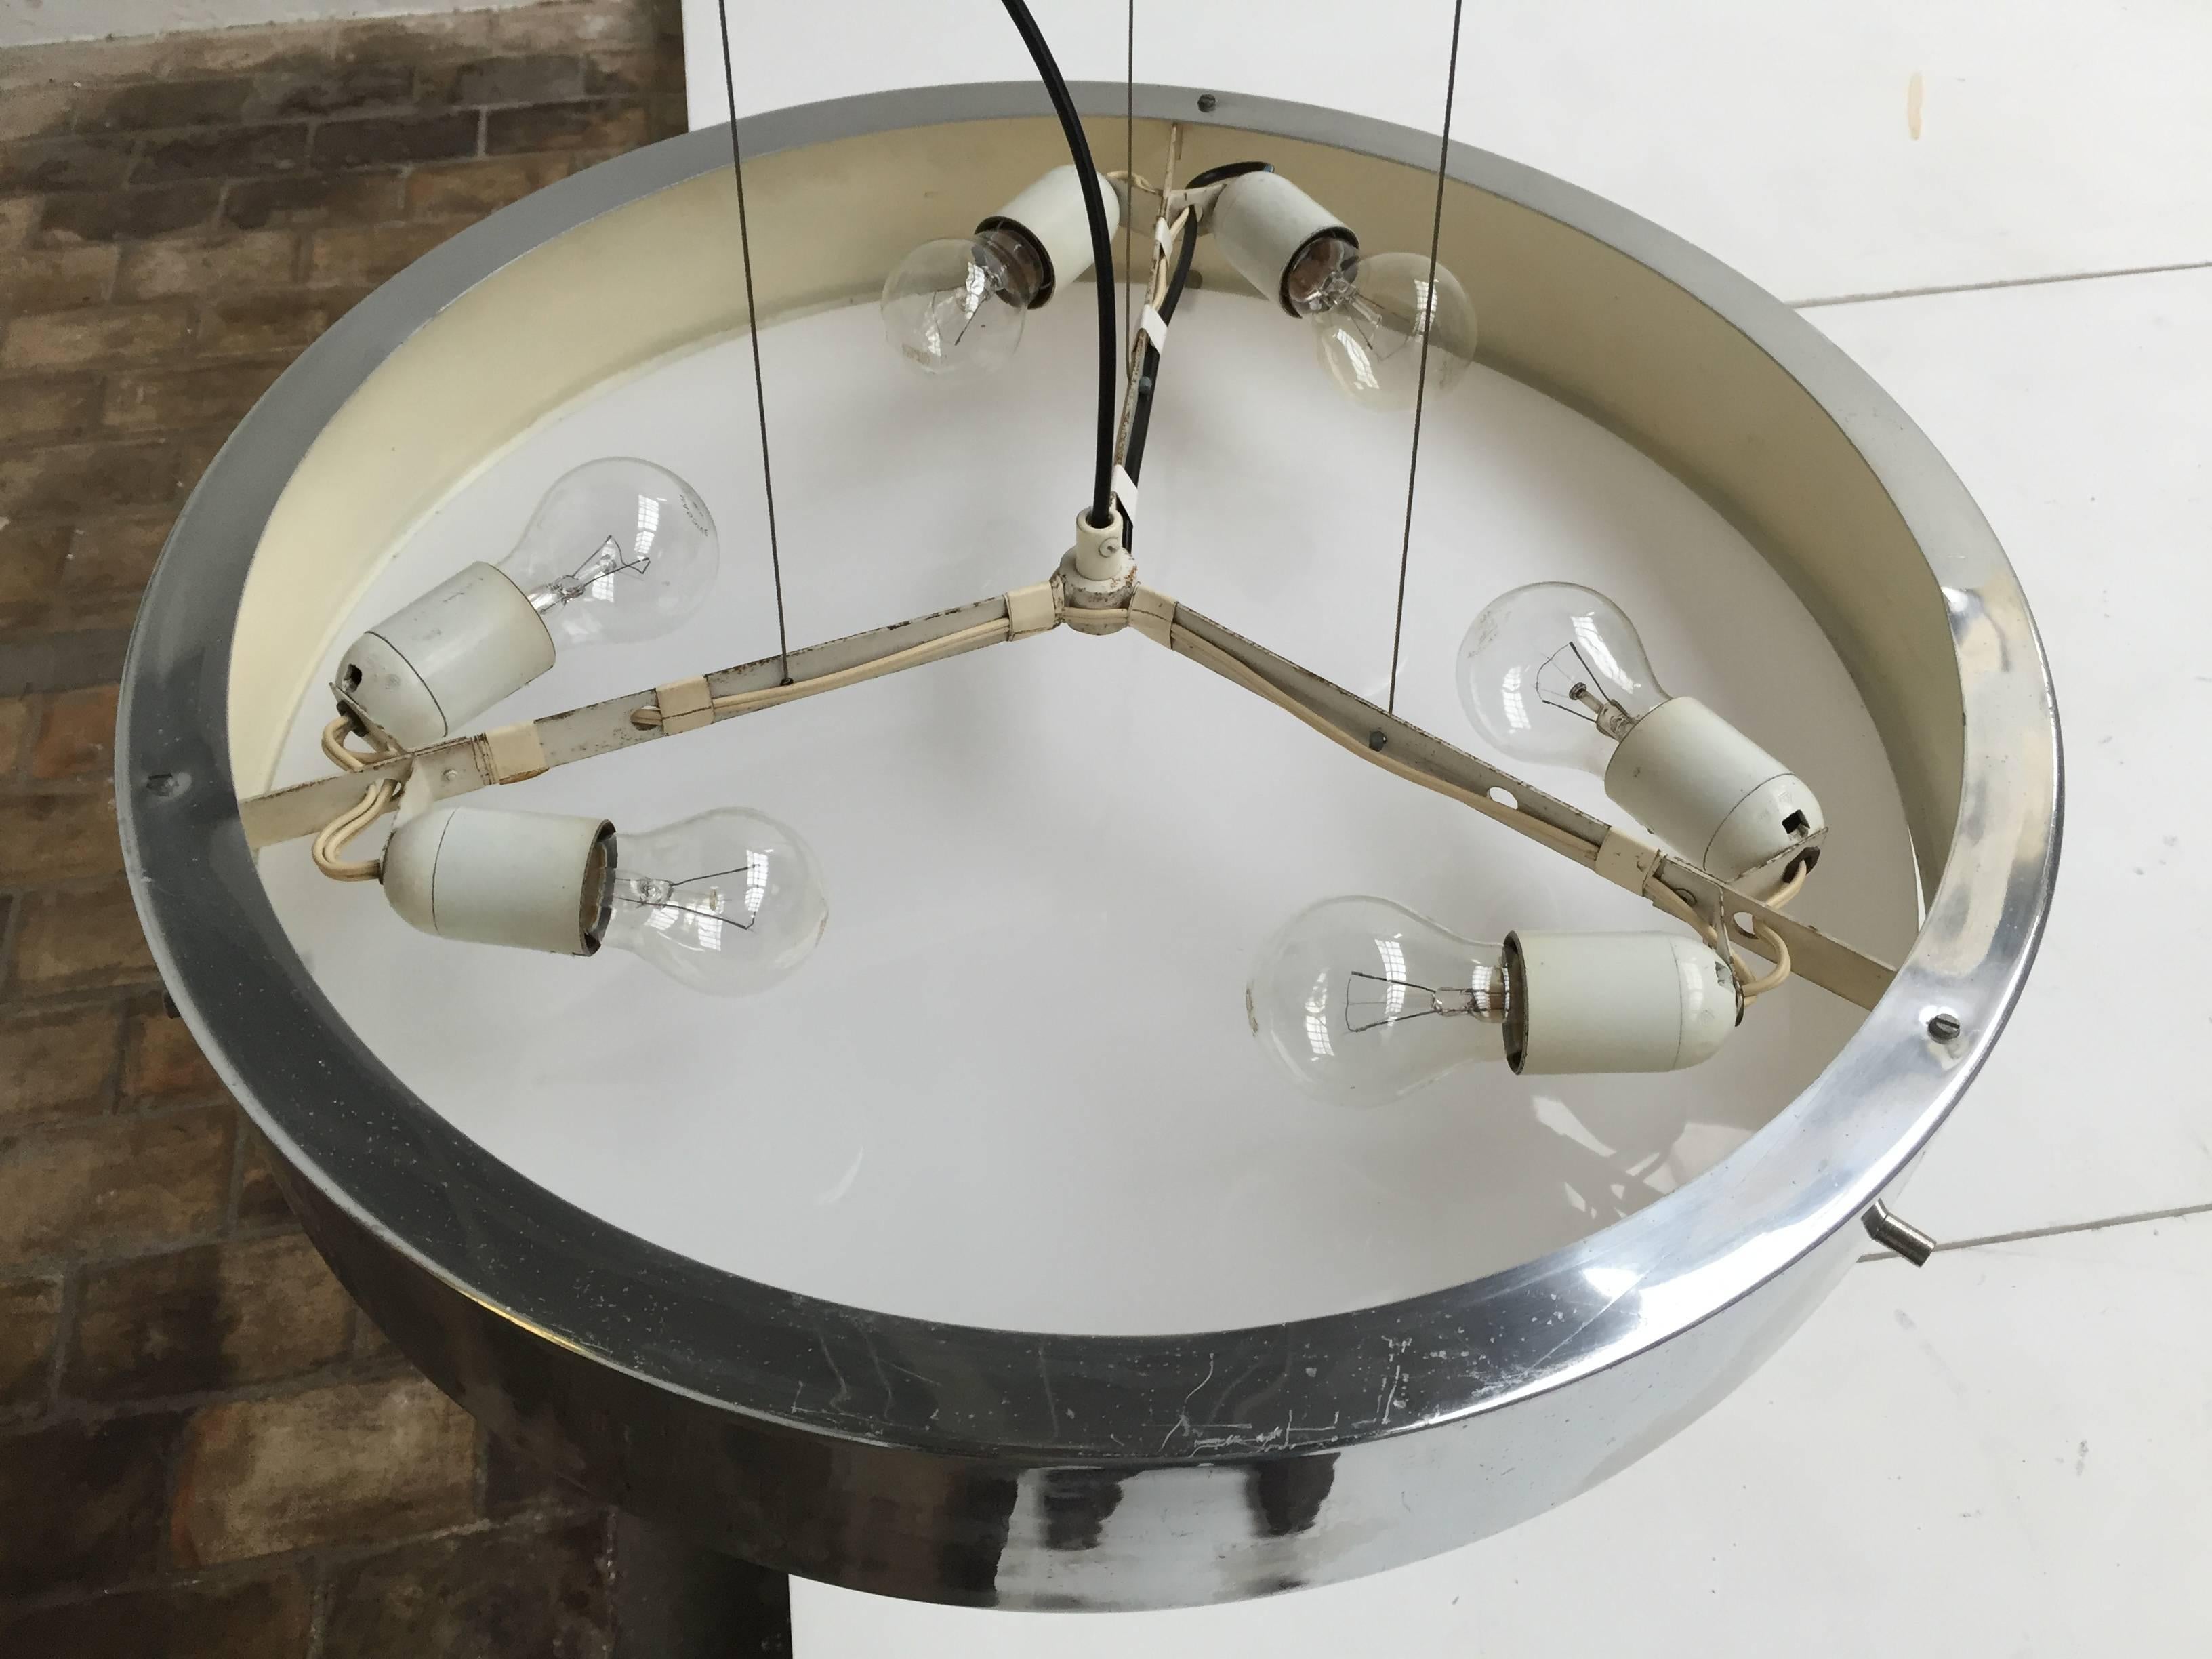 Beautiful minimal architectural pendant by the founder of Stilnovo, Italian designer Bruno Gatta.

The lamp was found with all the original parts and polished aluminium exterior shade with original milk glass diffuser but was failing the metal